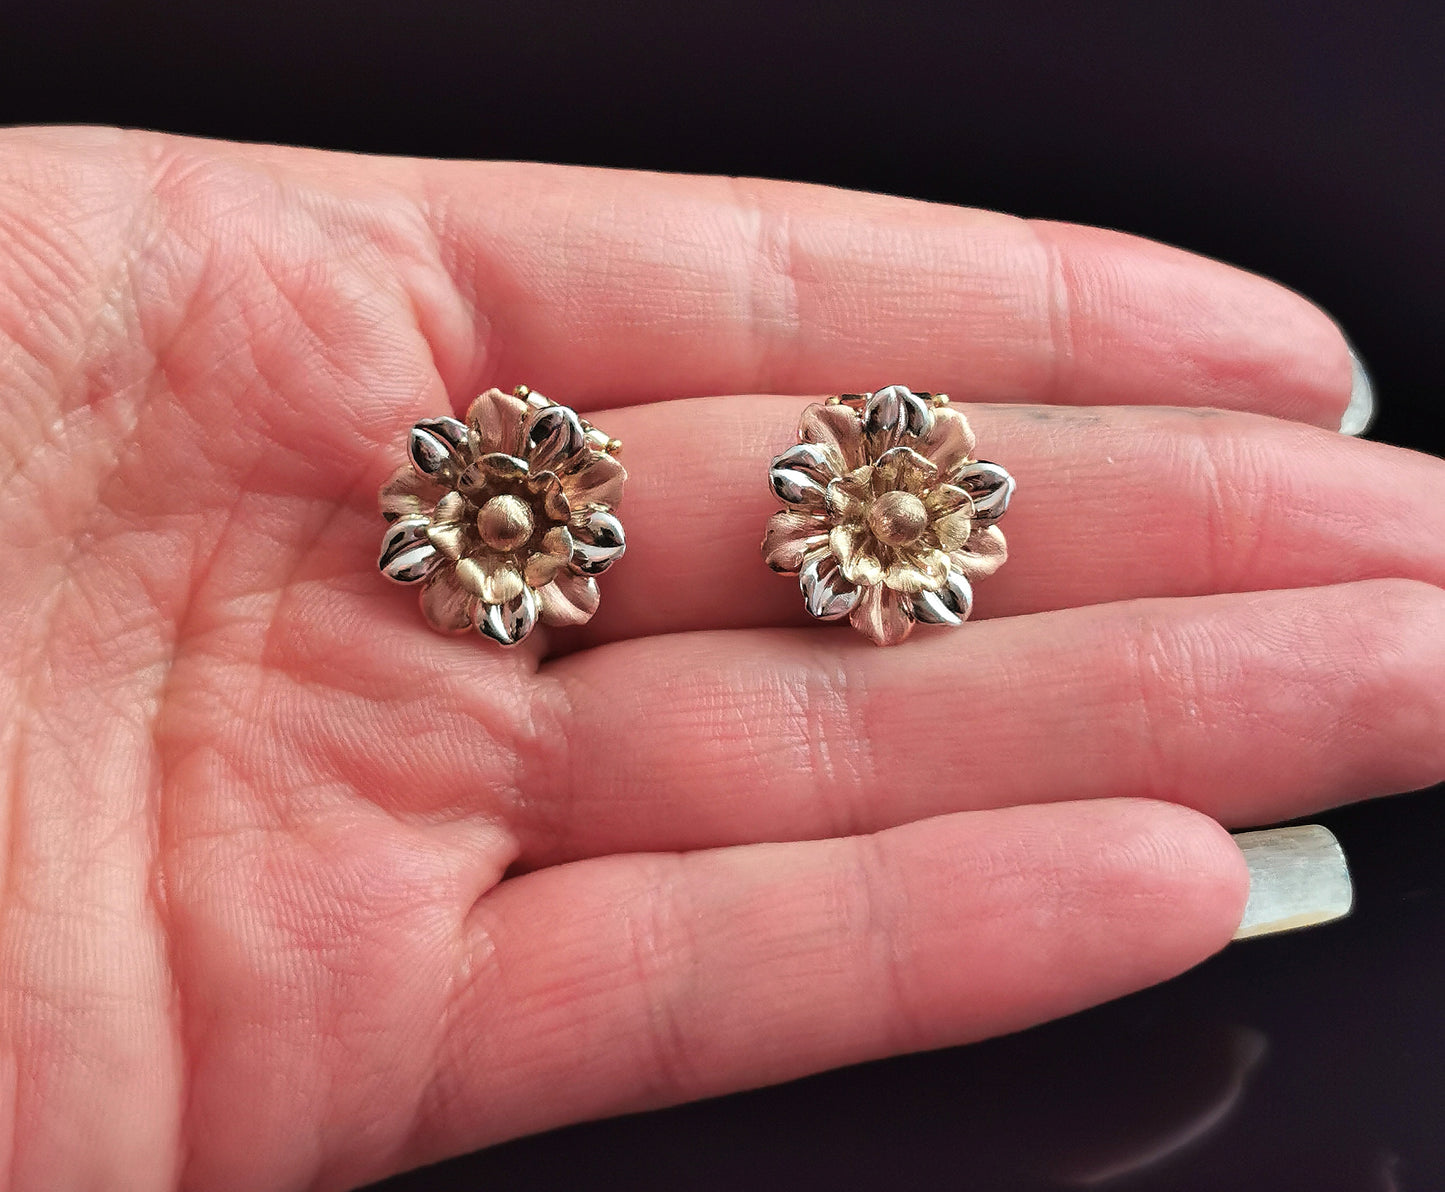 Flower clip on earrings, floral tri colour 9ct gold